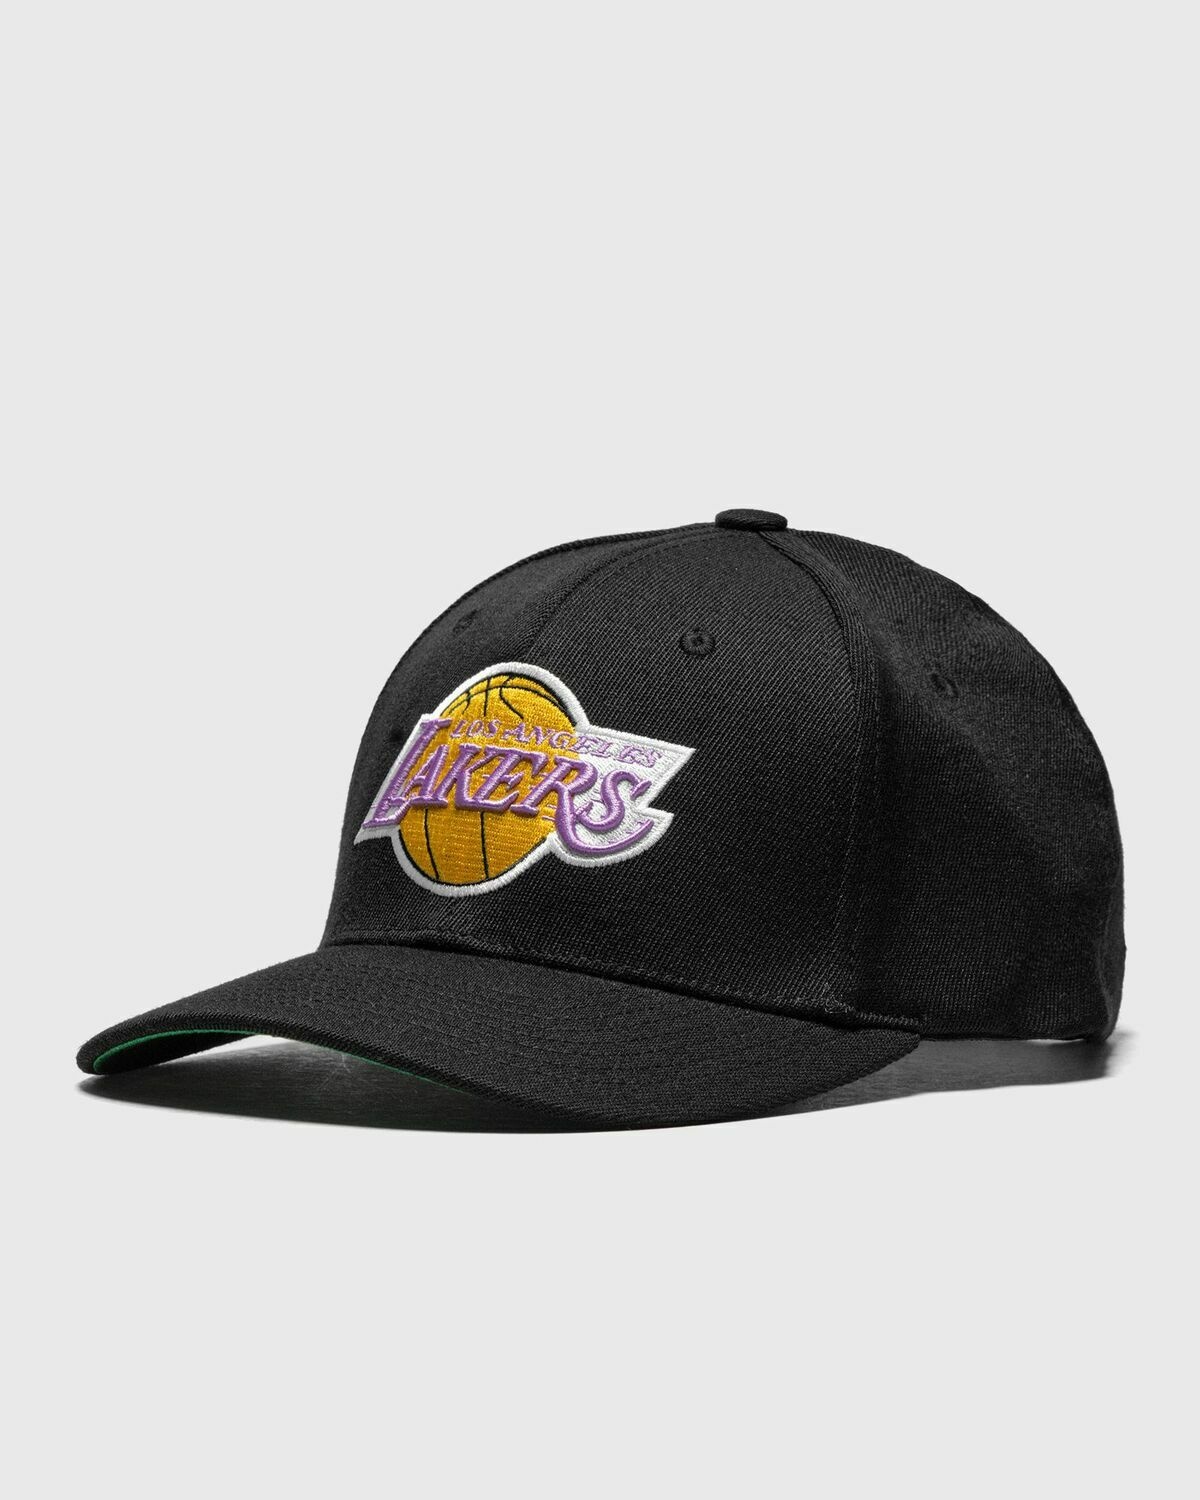 Mitchell & Ness Team Logo High Crown 6 Panel Classic Red Snapback Black - Mens - Caps